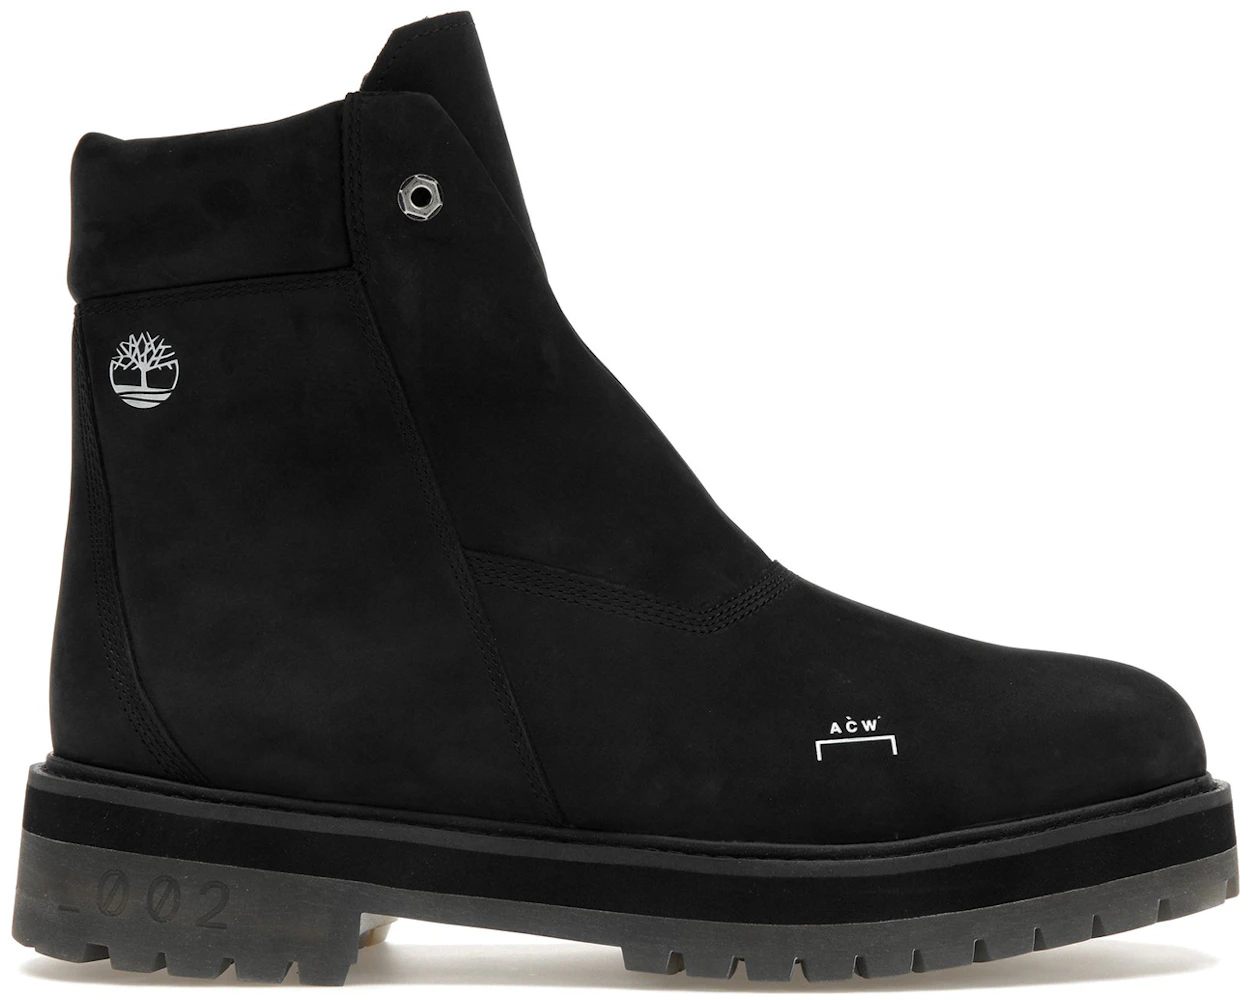 Timberland 6 Inch Zip Boot A-COLD-WALL Black Men's - TB0A68VB015 - US